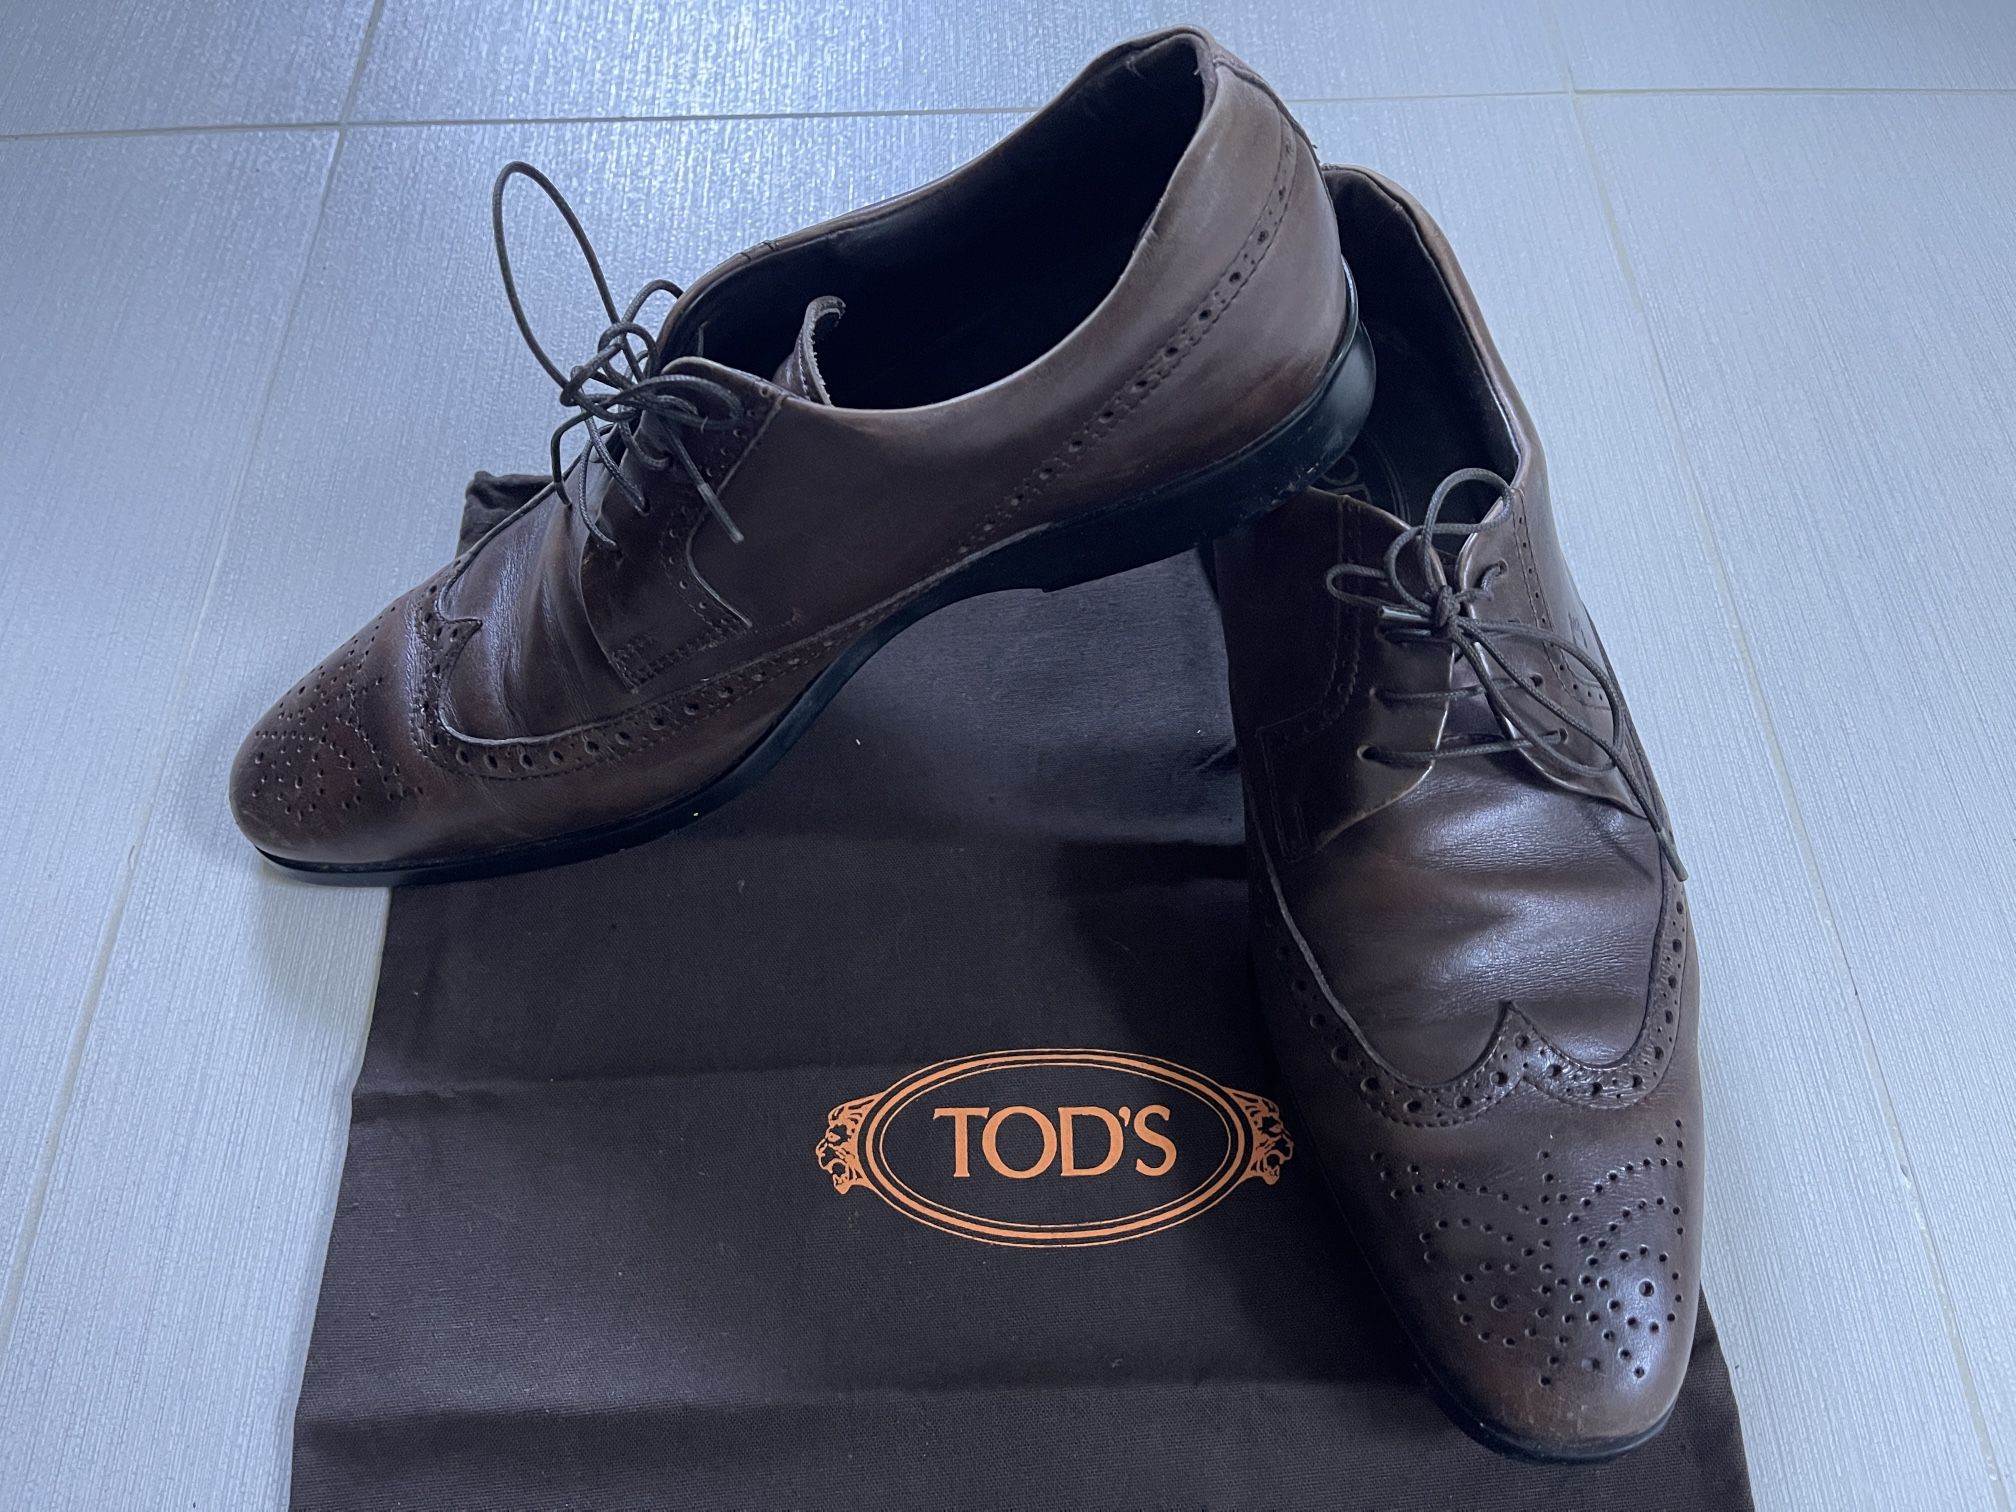 TOD’S Mens Oxford Derby Wingtip Shoes 10.5